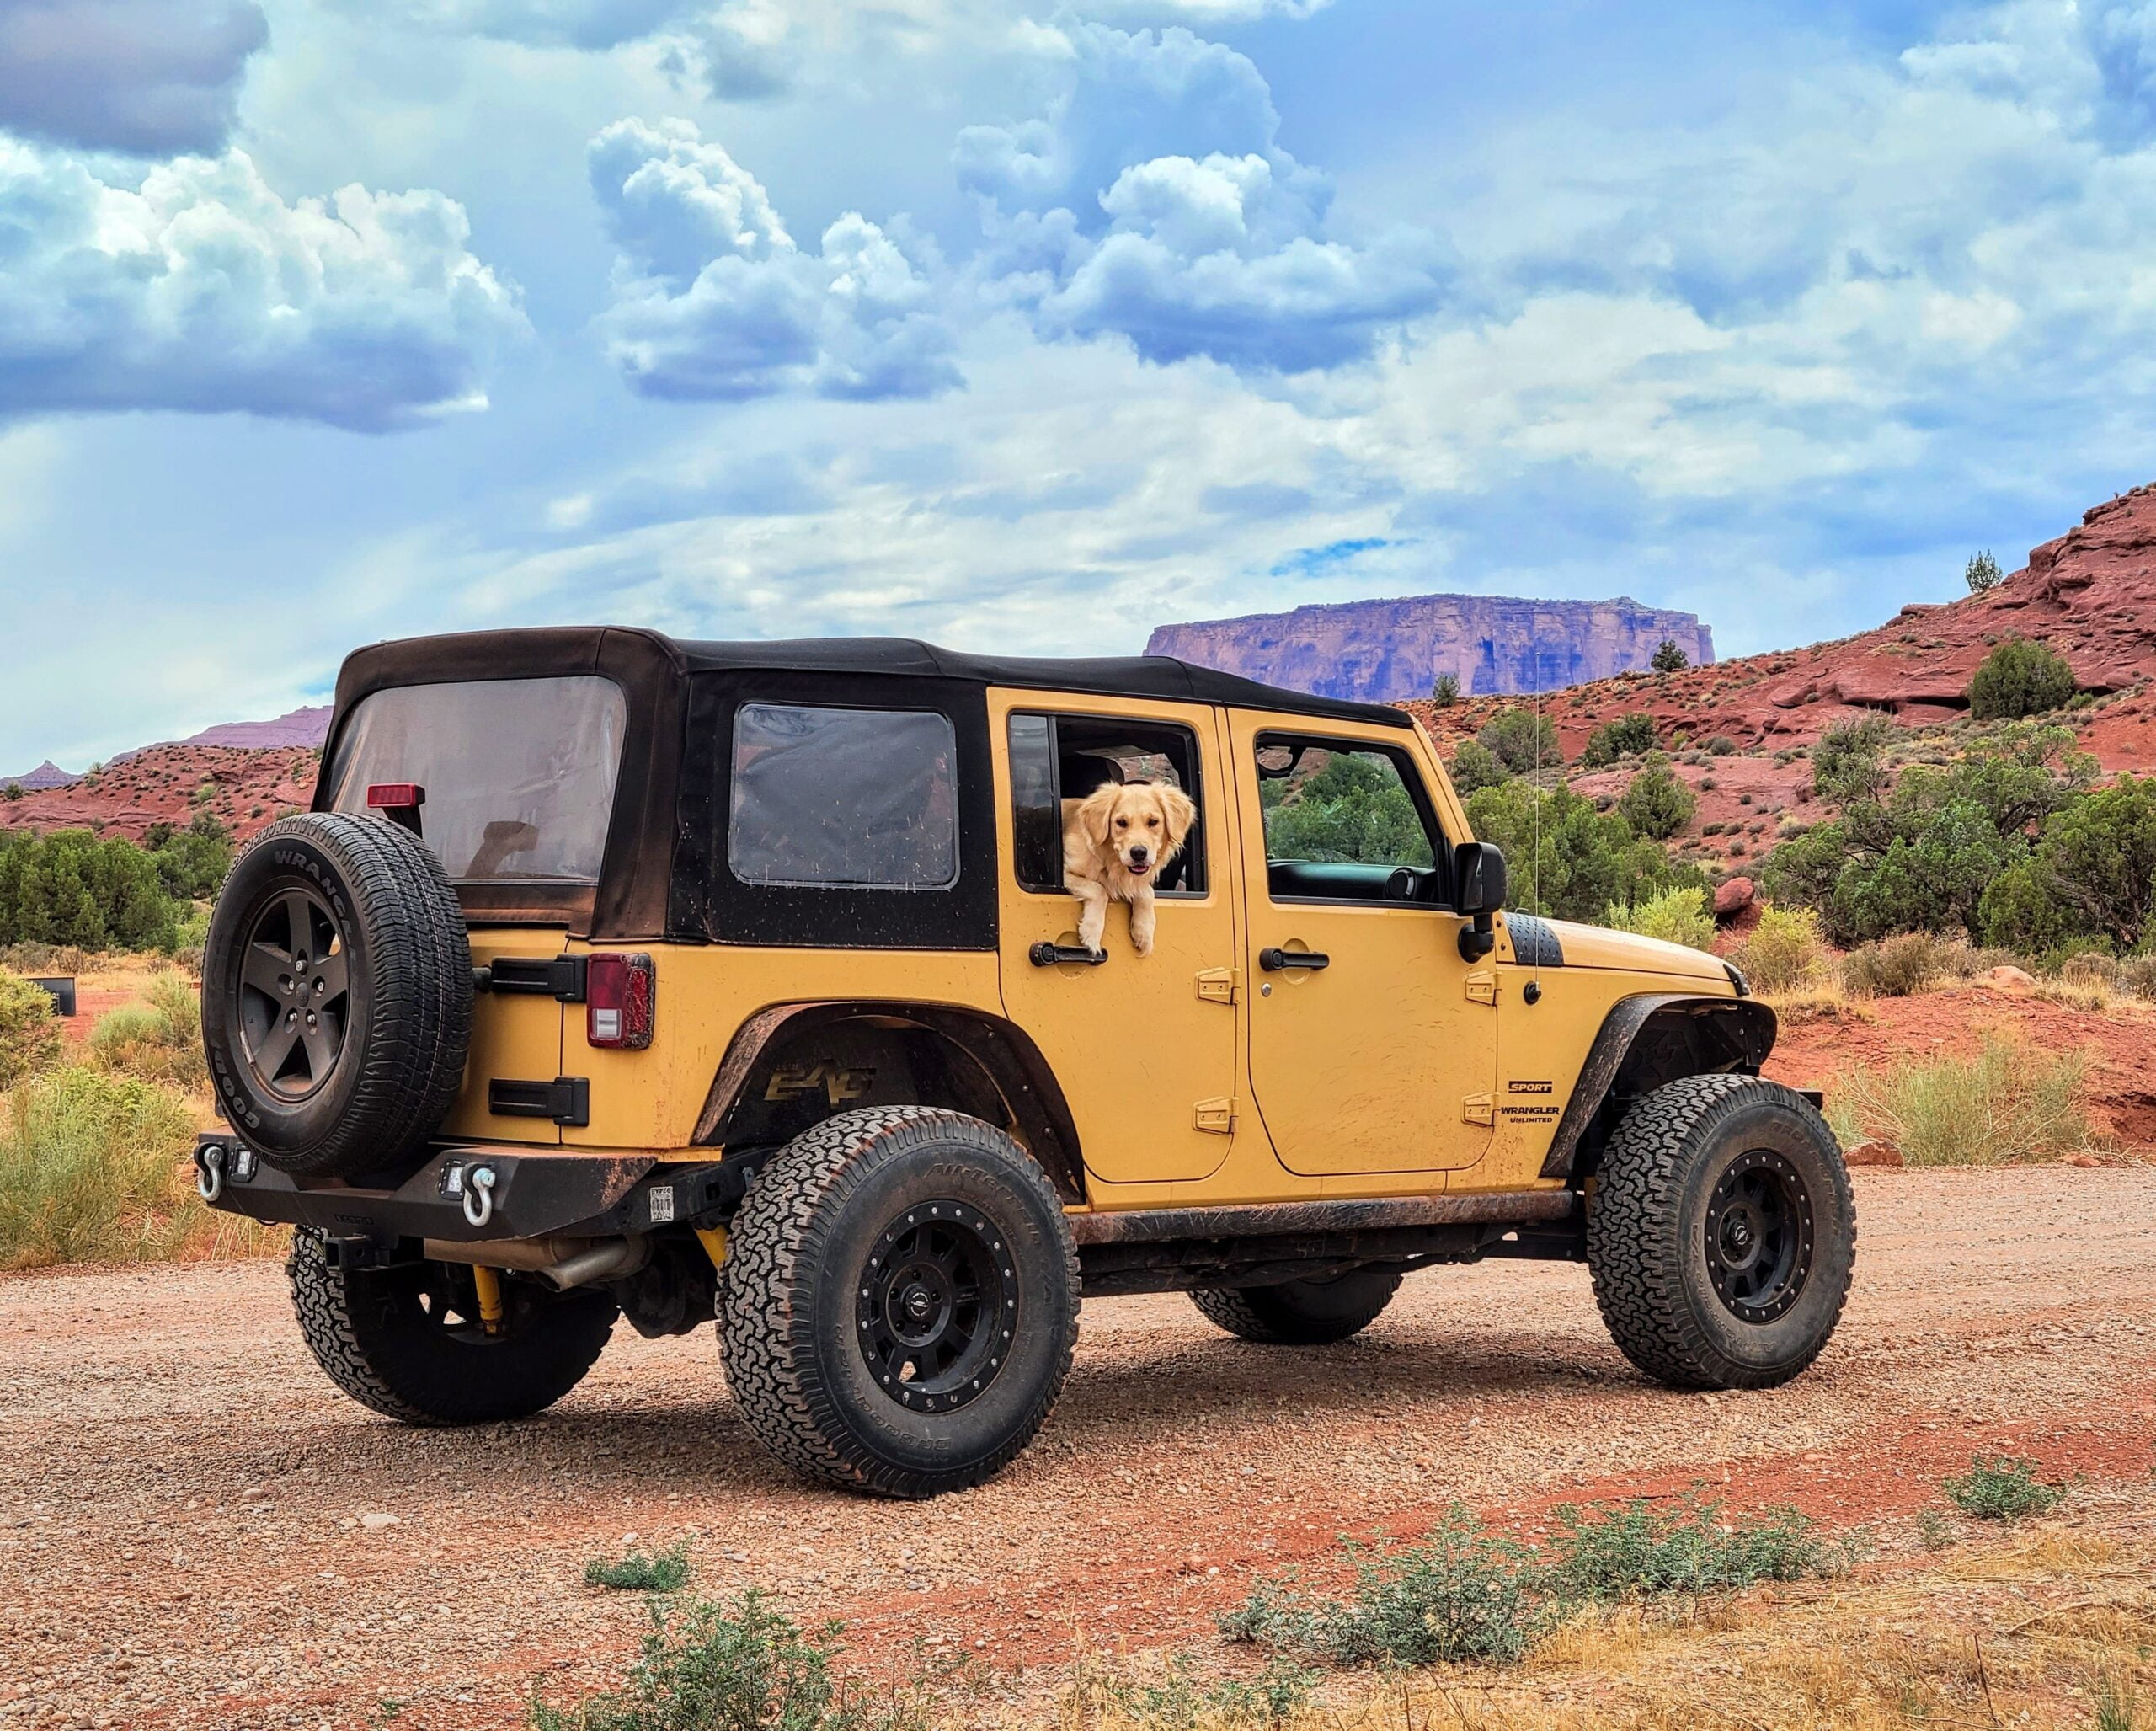 Road tripping with your pooch